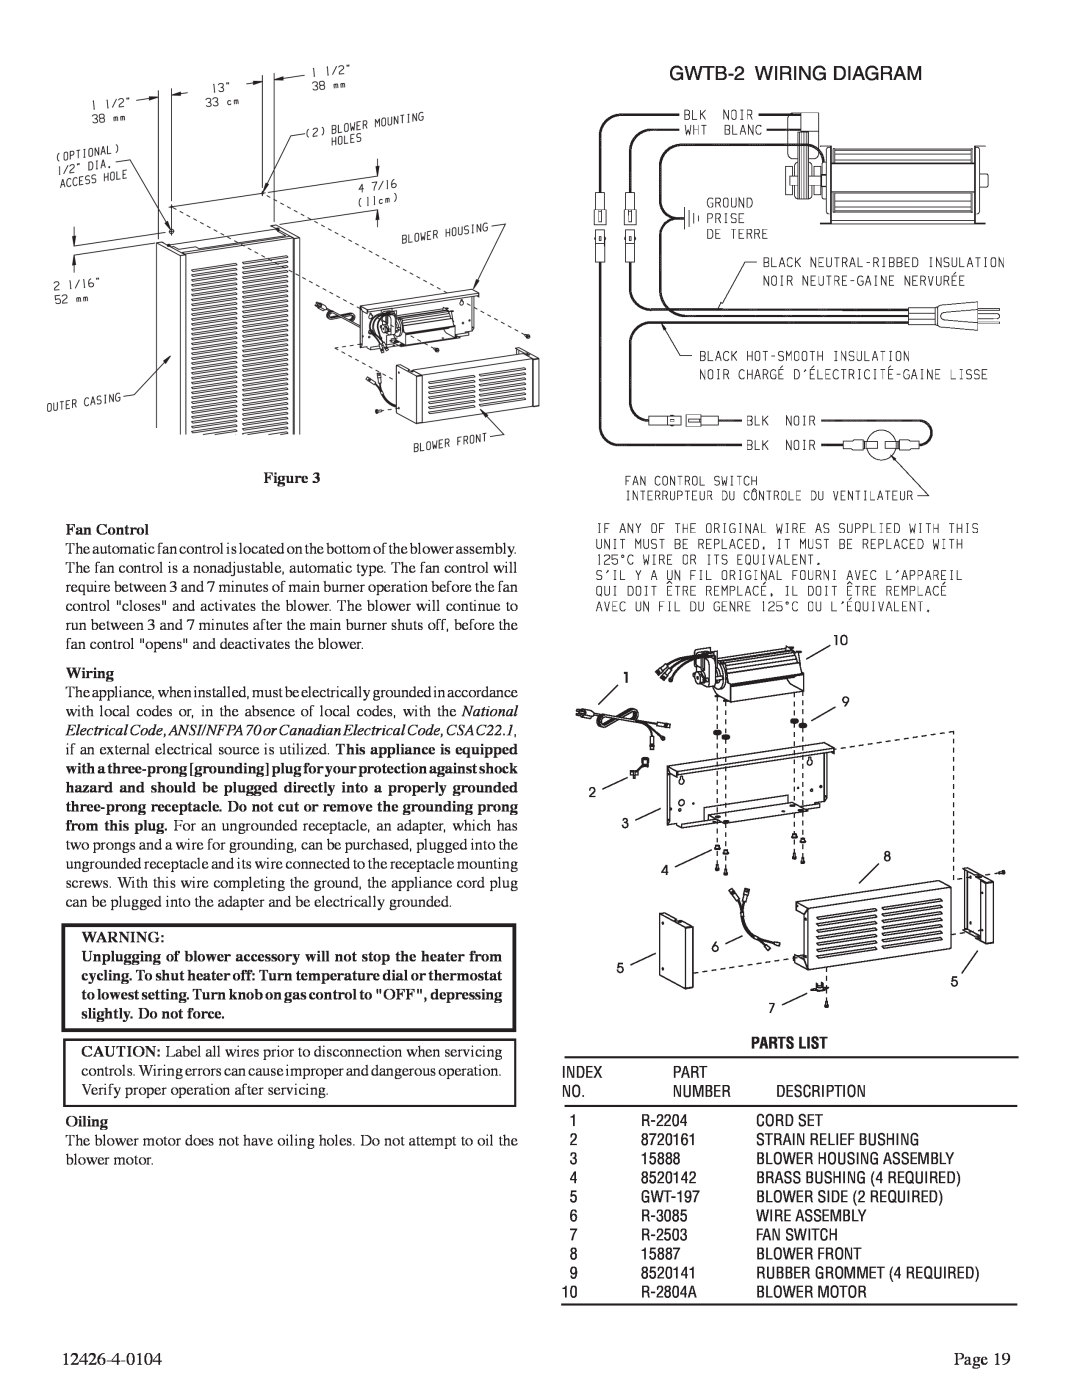 Empire Comfort Systems RB), GWT-50-2 GWTB-2WIRING DIAGRAM, Figure Fan Control, Wiring, Oiling, Parts List 